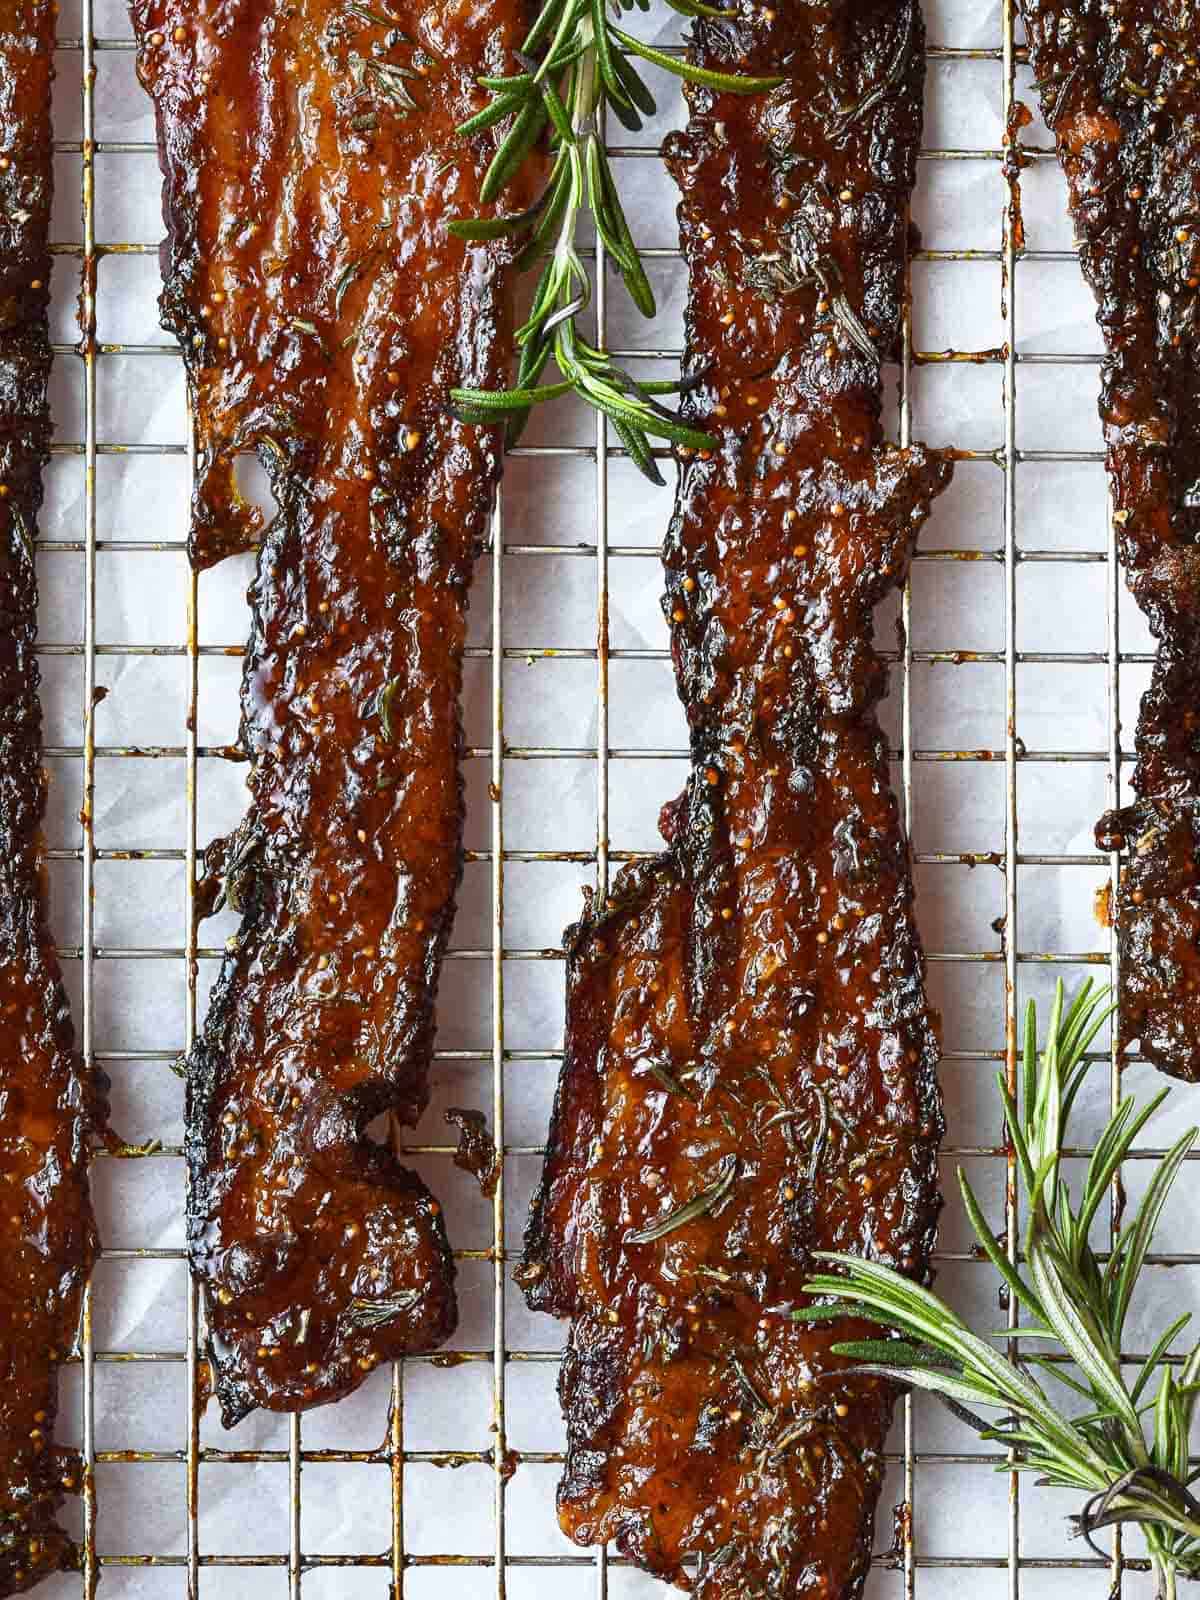 candied bacon cooling on a rack, is an extra special sweet and savory father's day recipe.